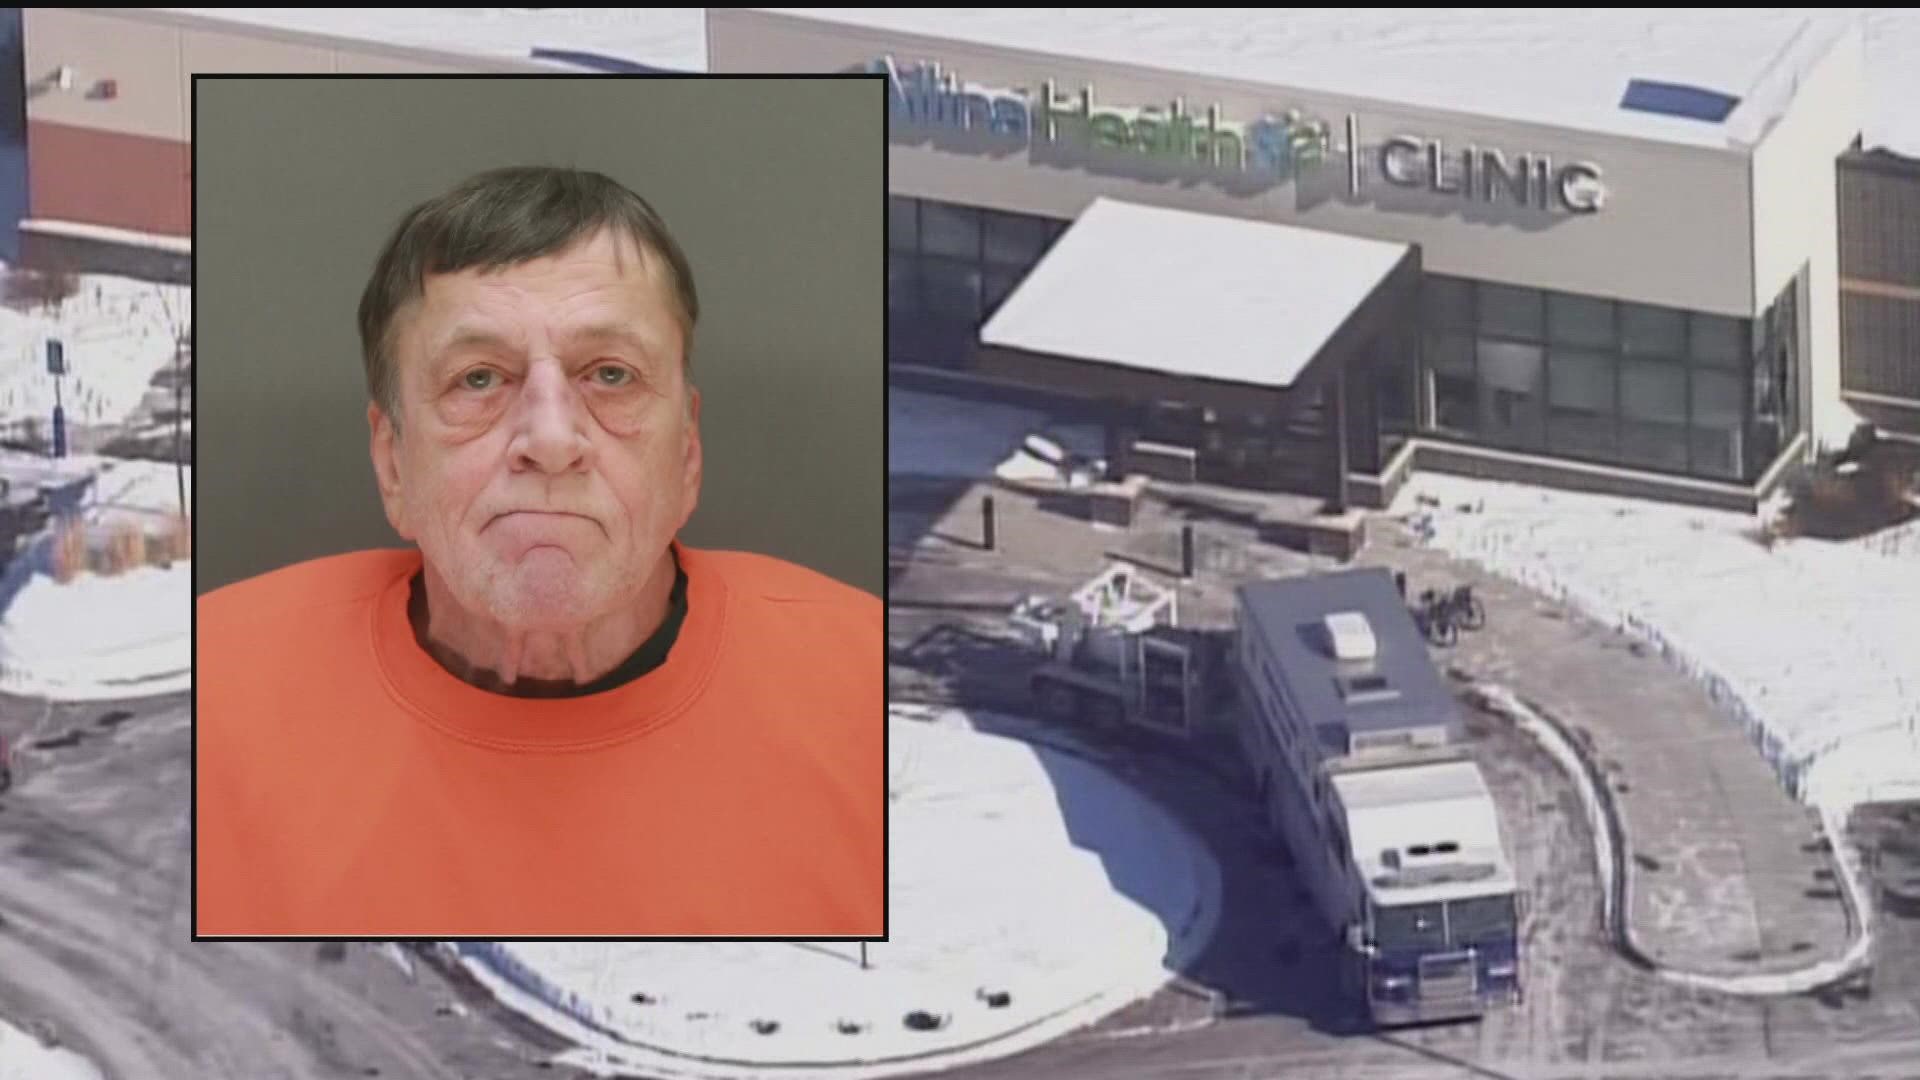 Gregory Ulrich faces a second-degree murder charge, attempted murder and other charges for the shooting at the Allina Clinic in Buffalo in 2021.